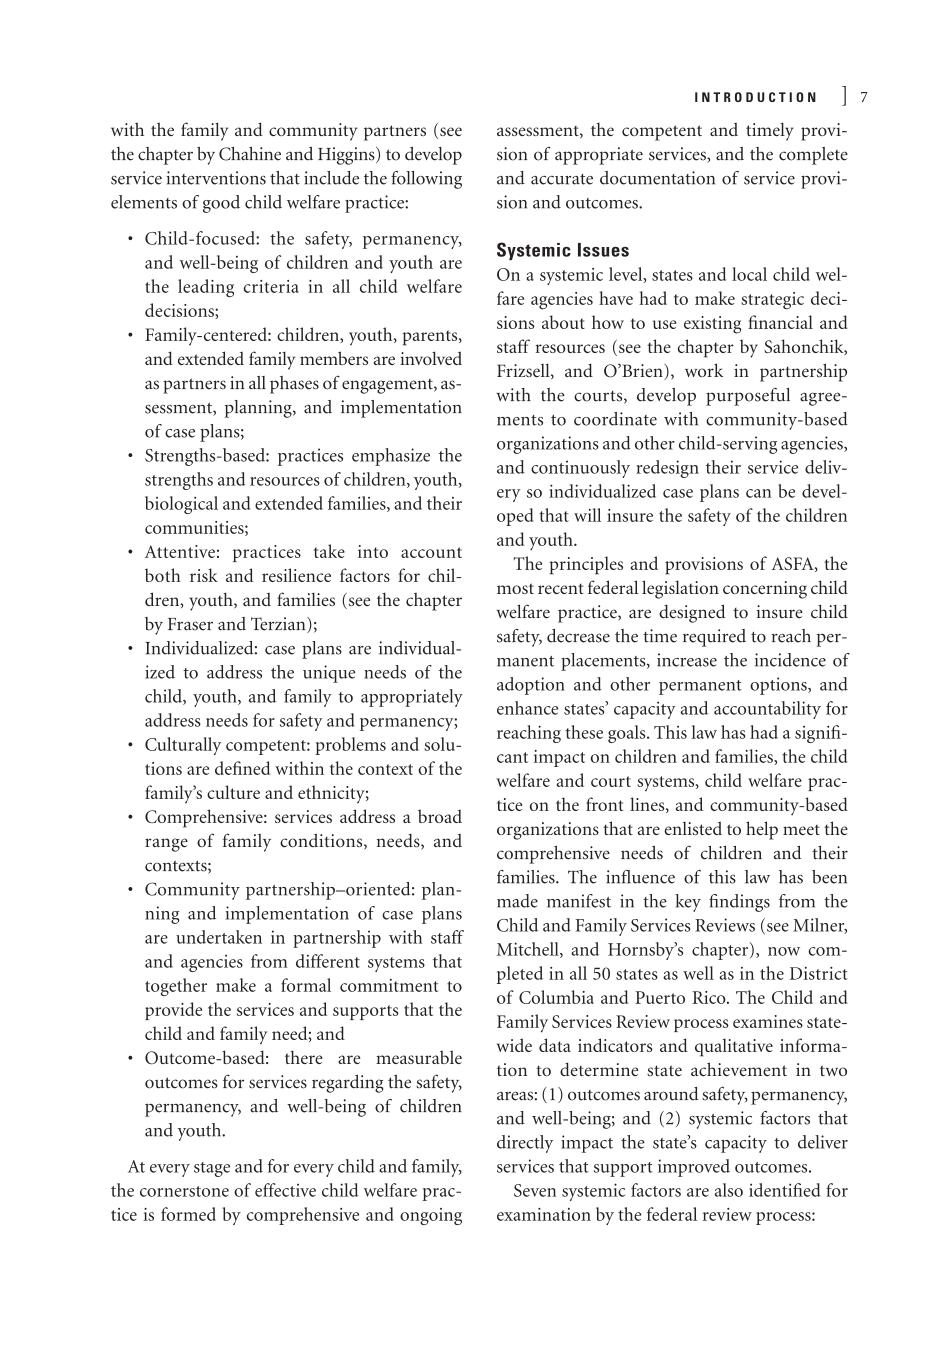 Child Welfare for the Twenty-first Century: A Handbook of Practices, Policies, and Programs page 7